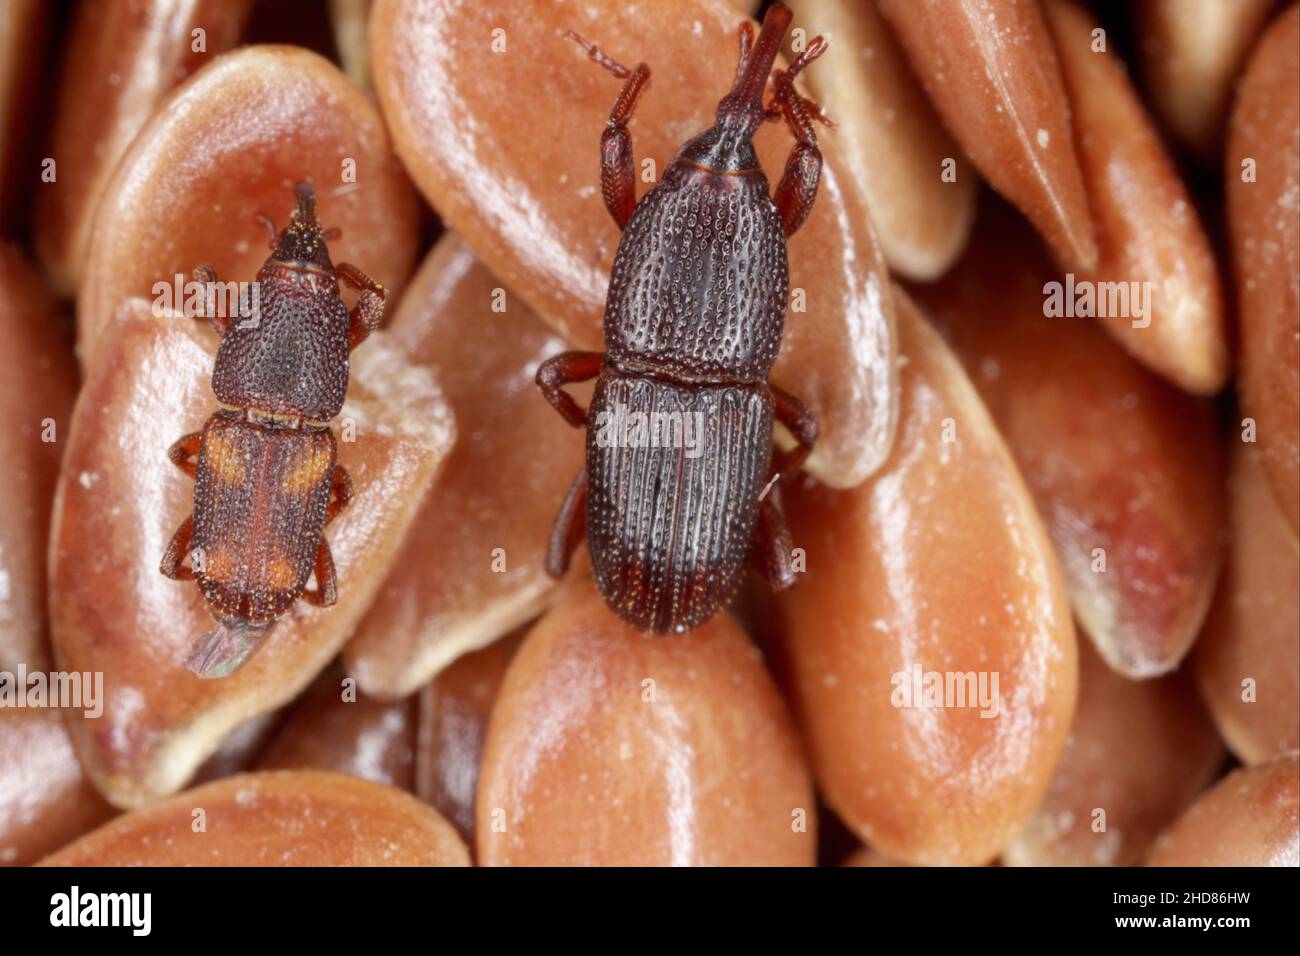 Wheat weevil Sitophilus granarius and rice weevil Sitophilus oryzae (a stored product pests) on flax seeds. High magnification. Stock Photo